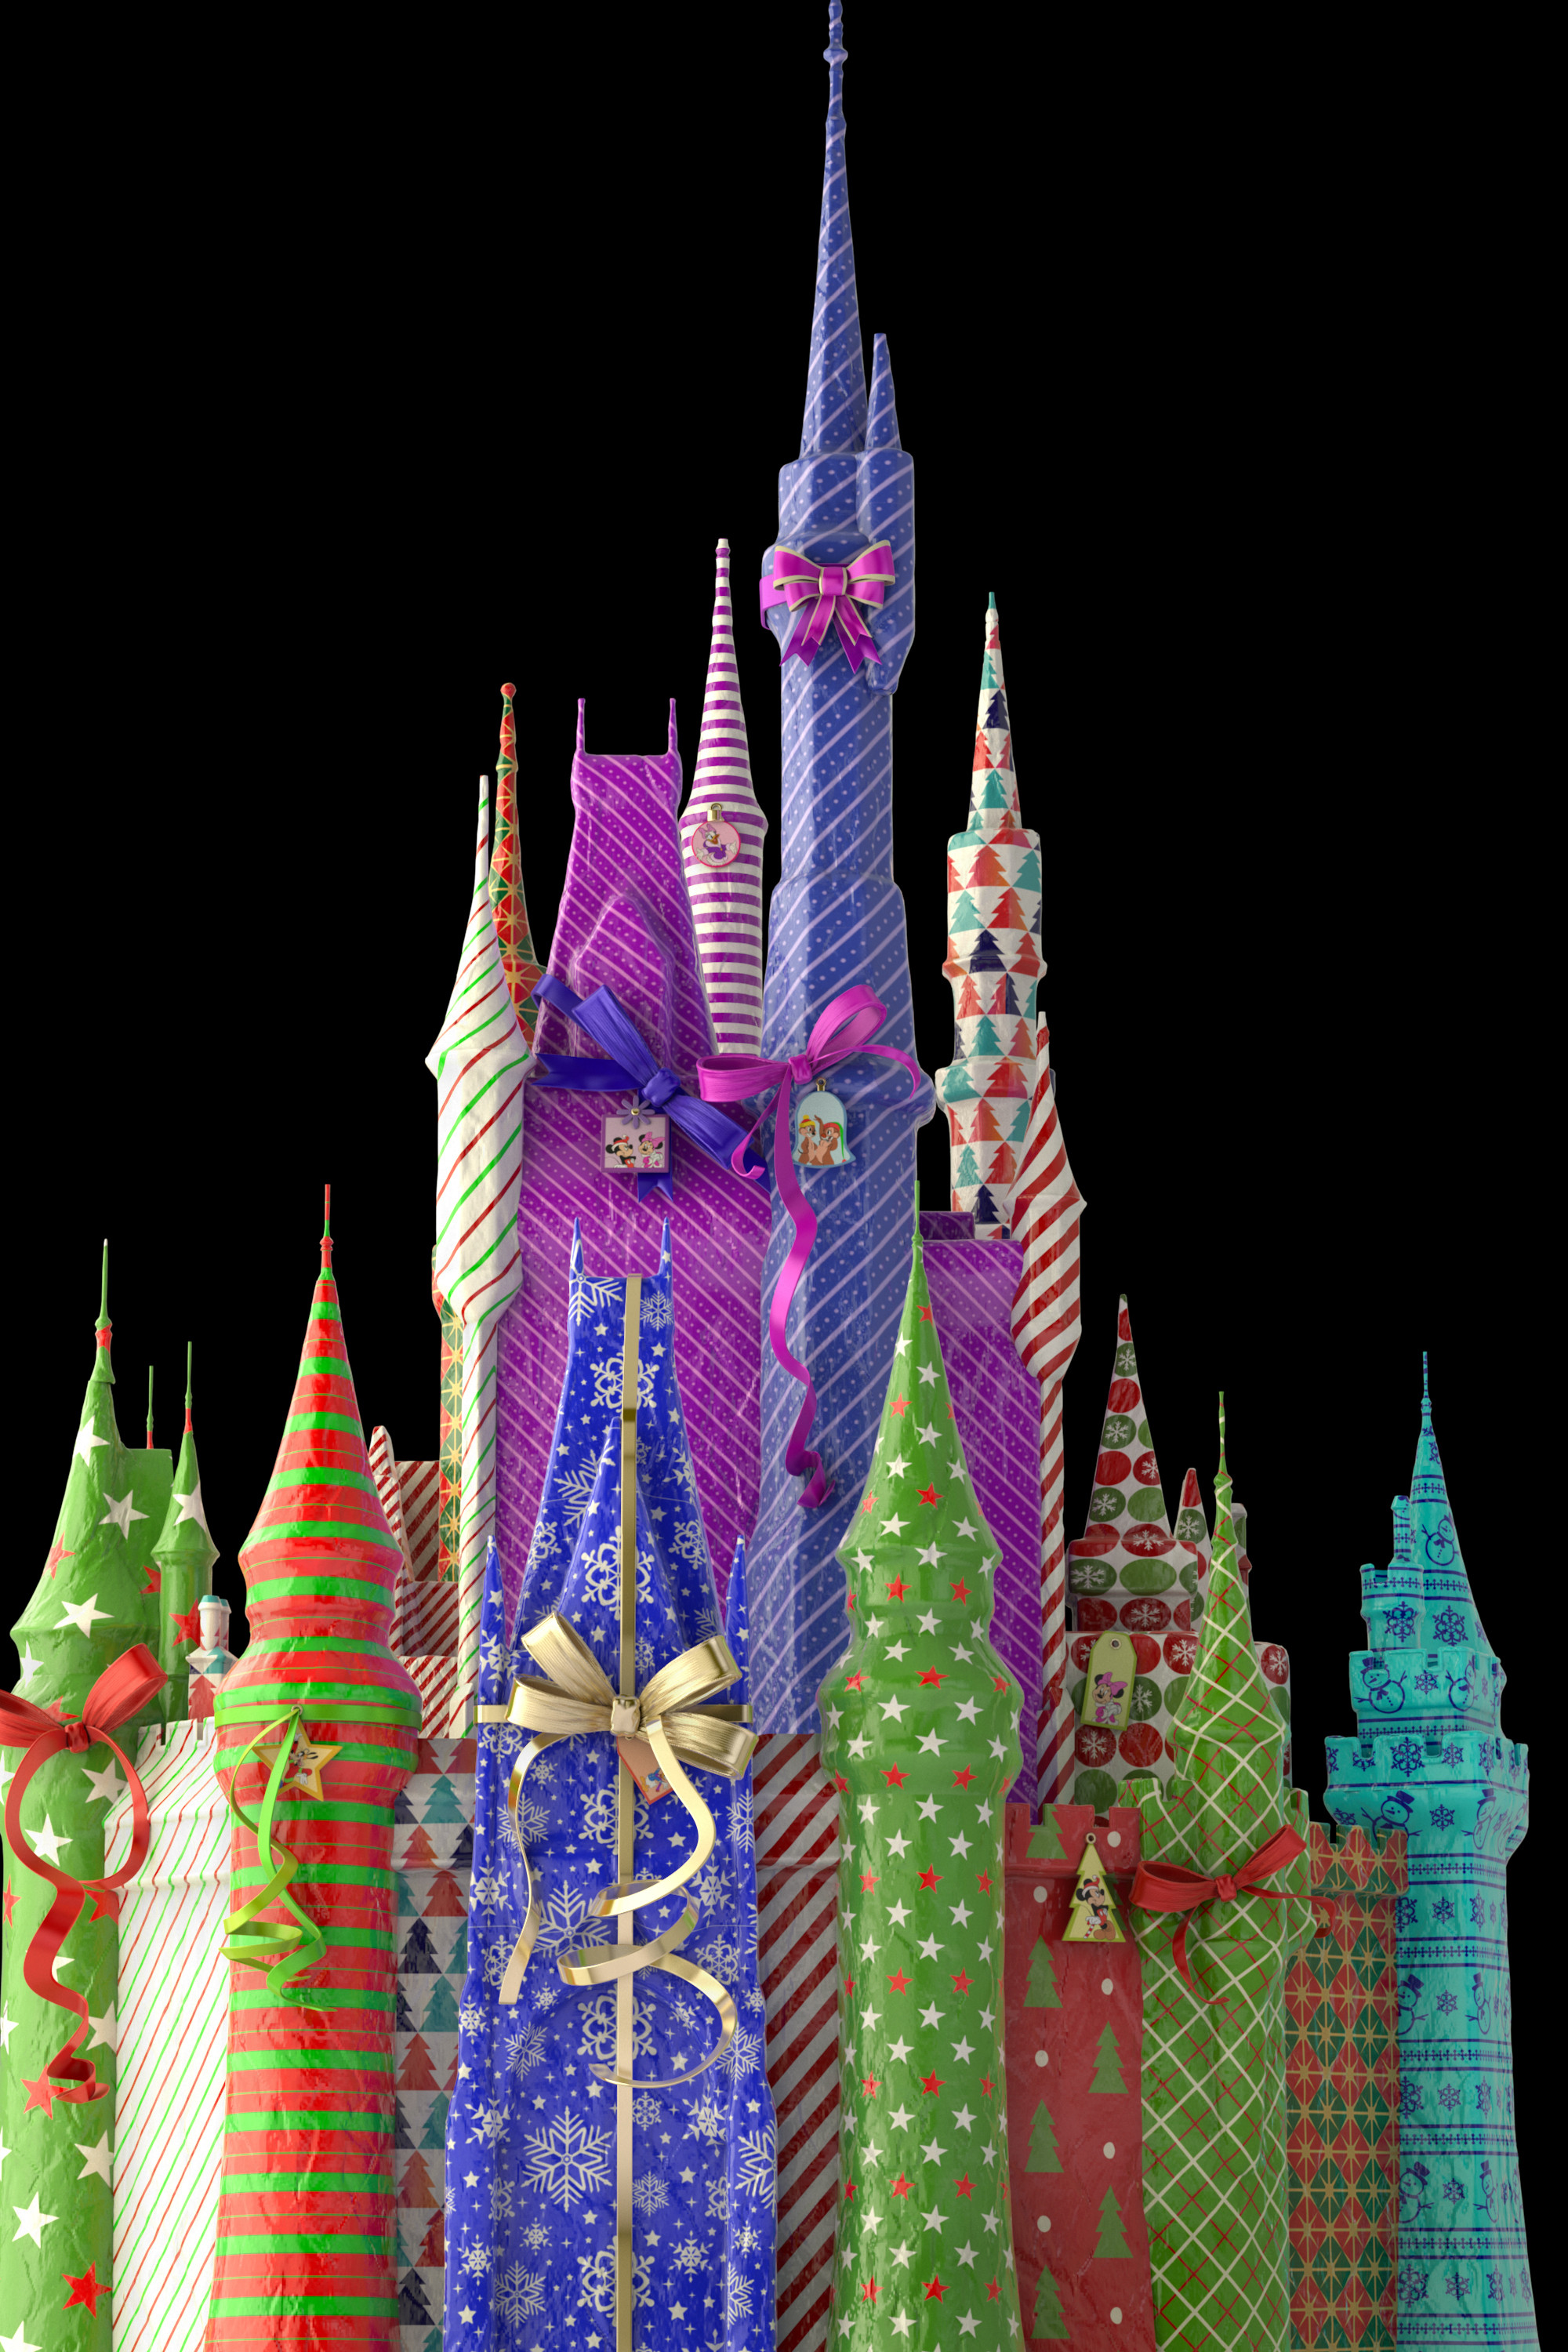 Gift wrapped Disney castle